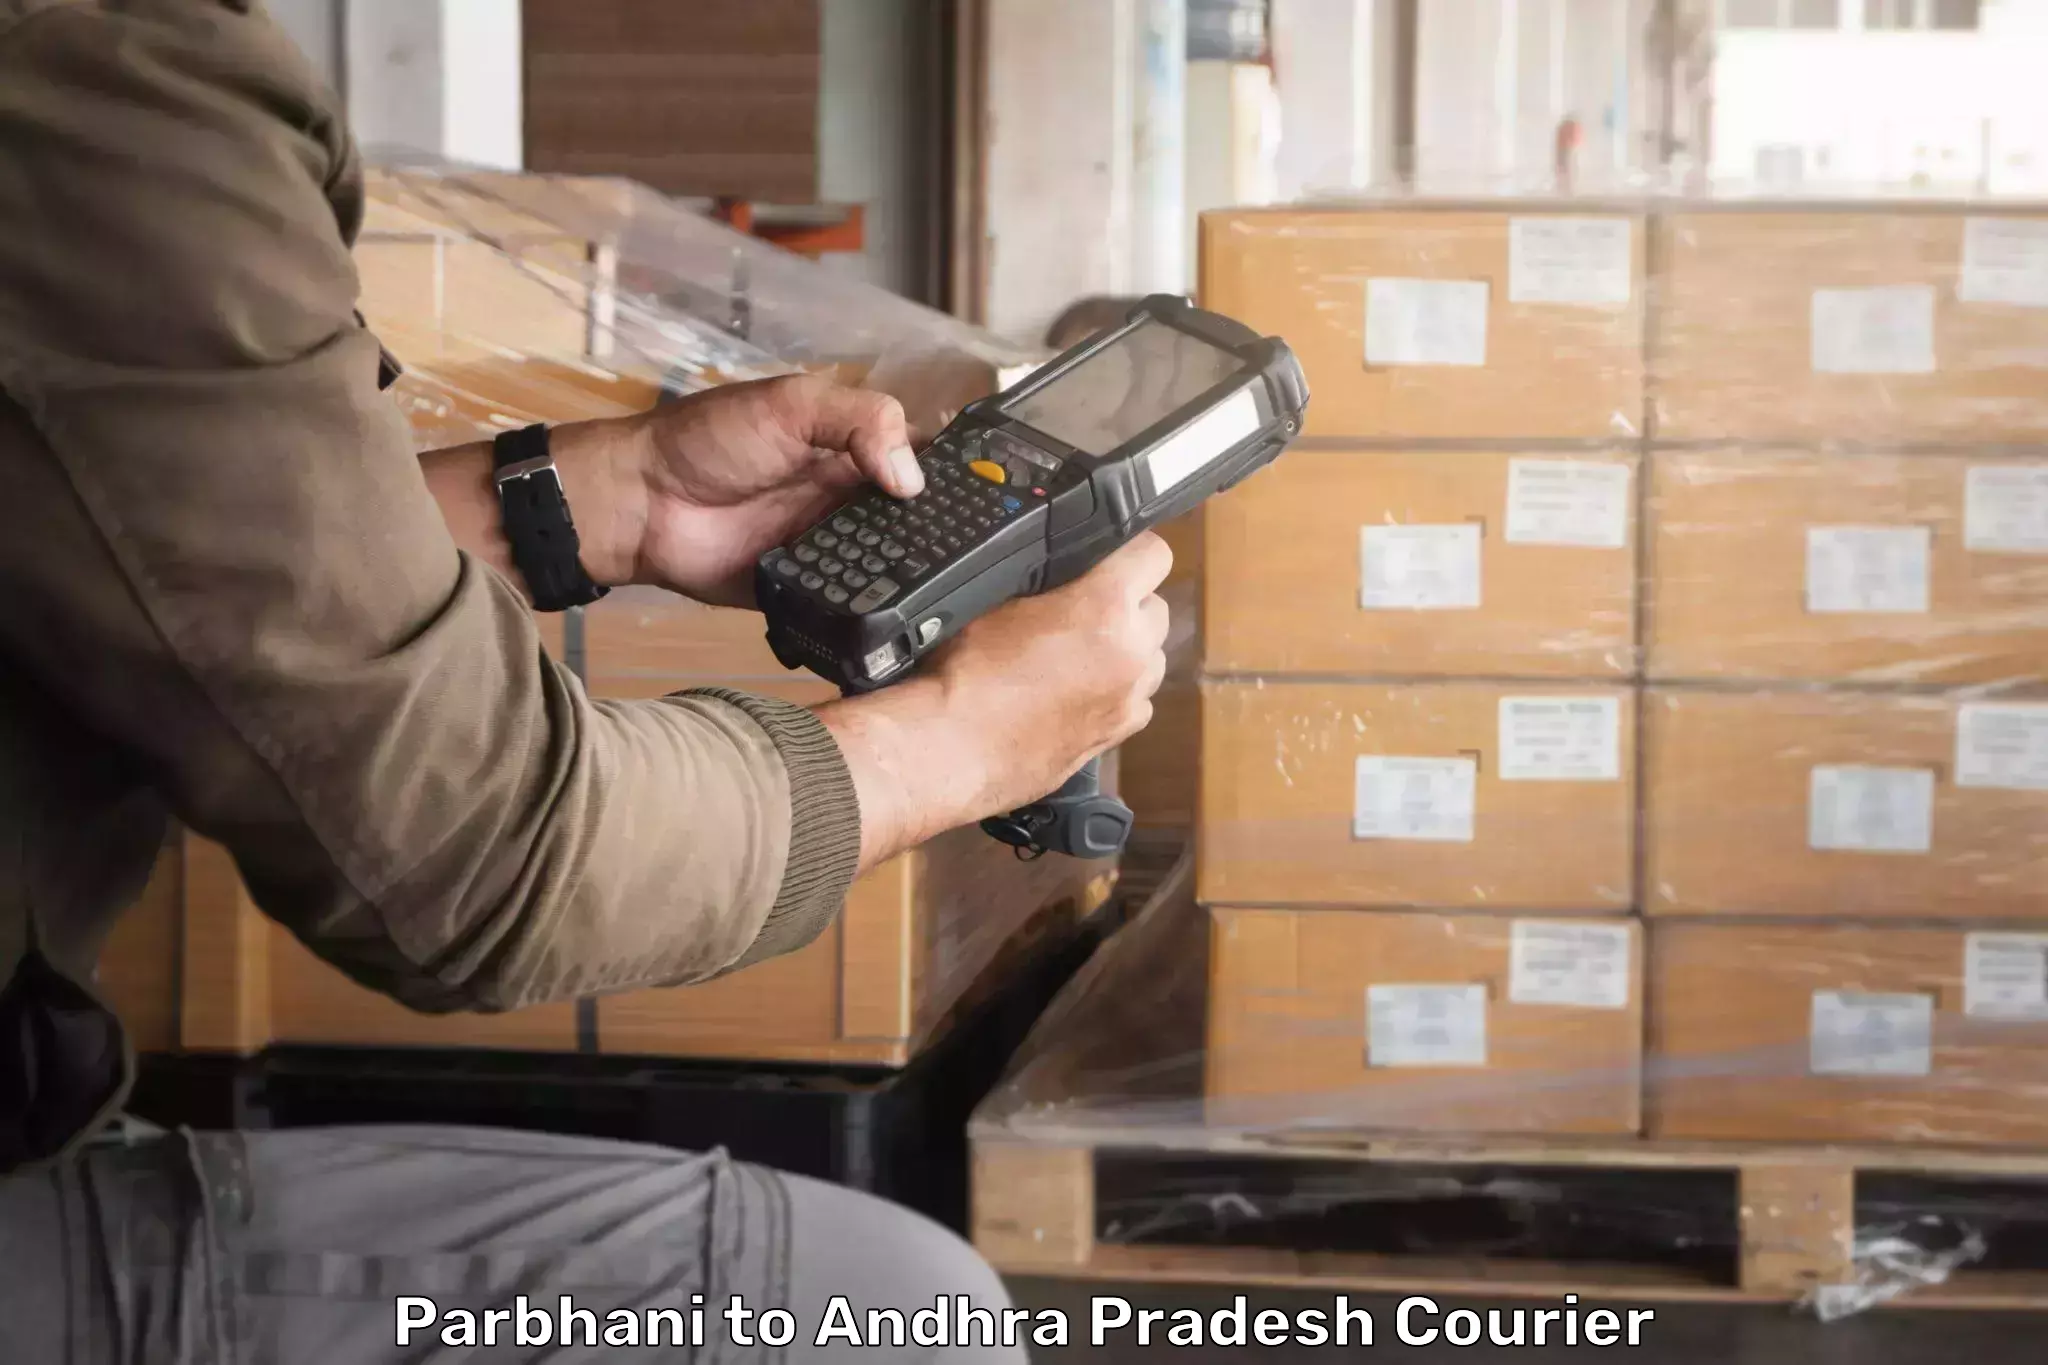 Reliable courier services Parbhani to Visakhapatnam Port